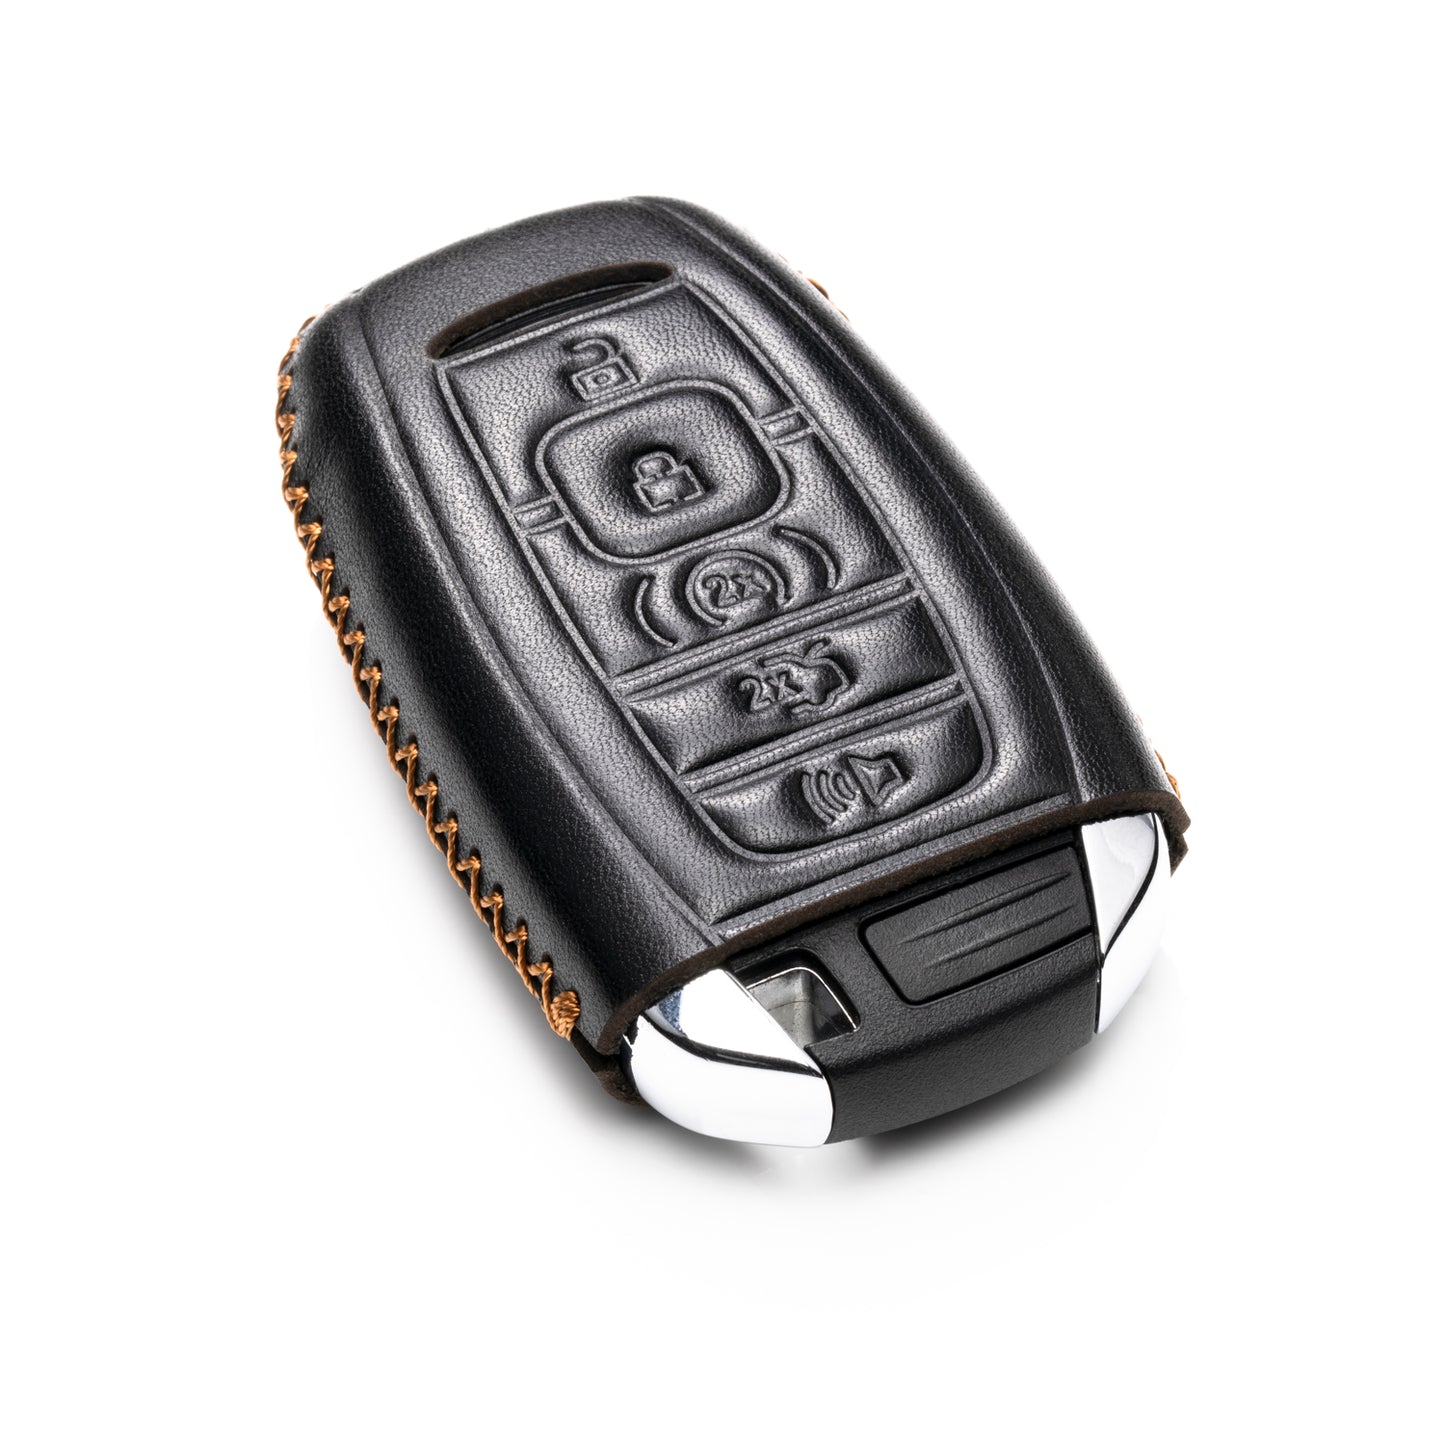 Vitodeco 5-Button Genuine Leather Smart Key Fob Case Cover Compatible with Lincoln Continental, MKC, MKZ, MKX 2017 - 2022, Lincoln Navigator 2018 - 2022, Lincoln Nautilus 2020 - 2022